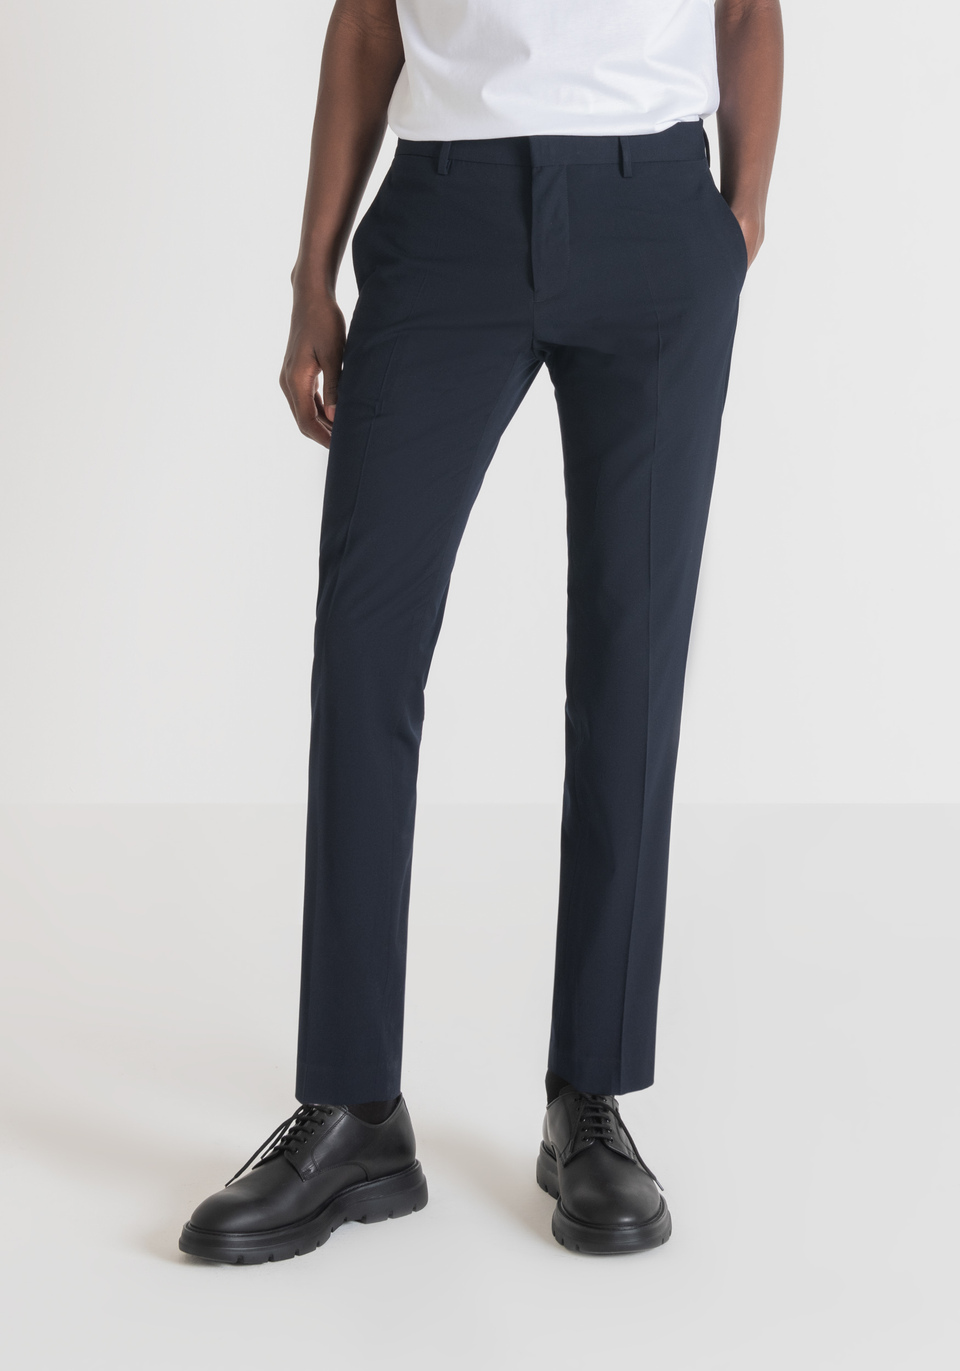 SLIM-FIT “BONNIE” TROUSRS IN A SOFT-TOUCH FABRIC - Antony Morato Online Shop